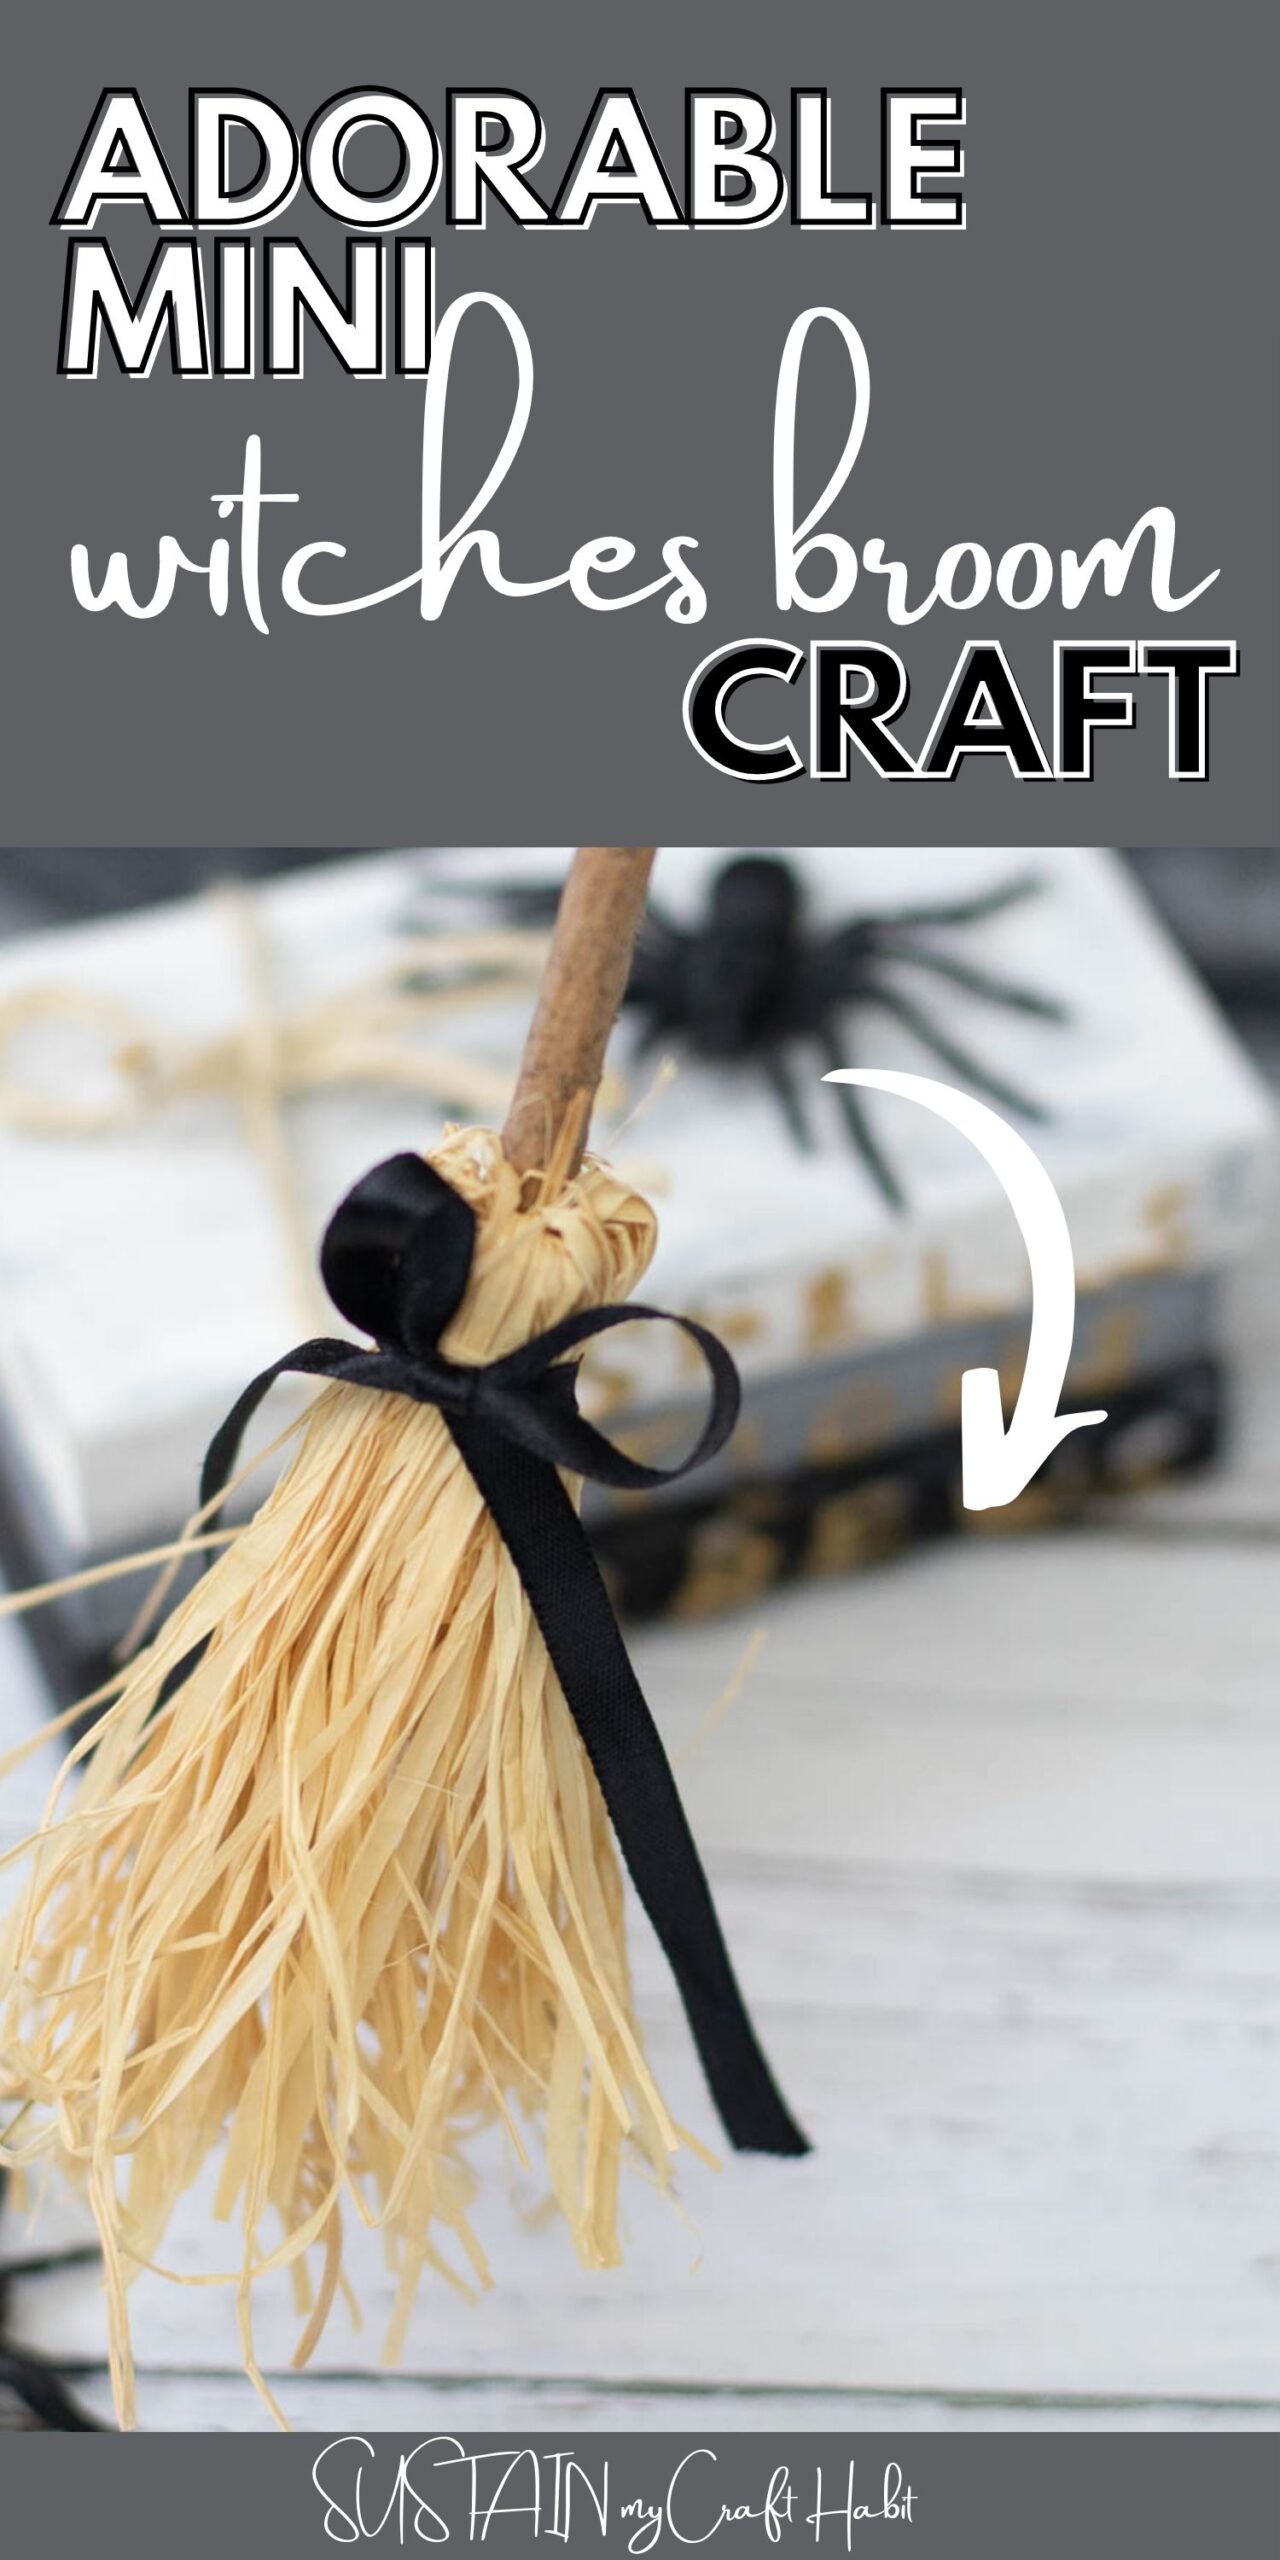 Mini witches broom craft with text overlay.